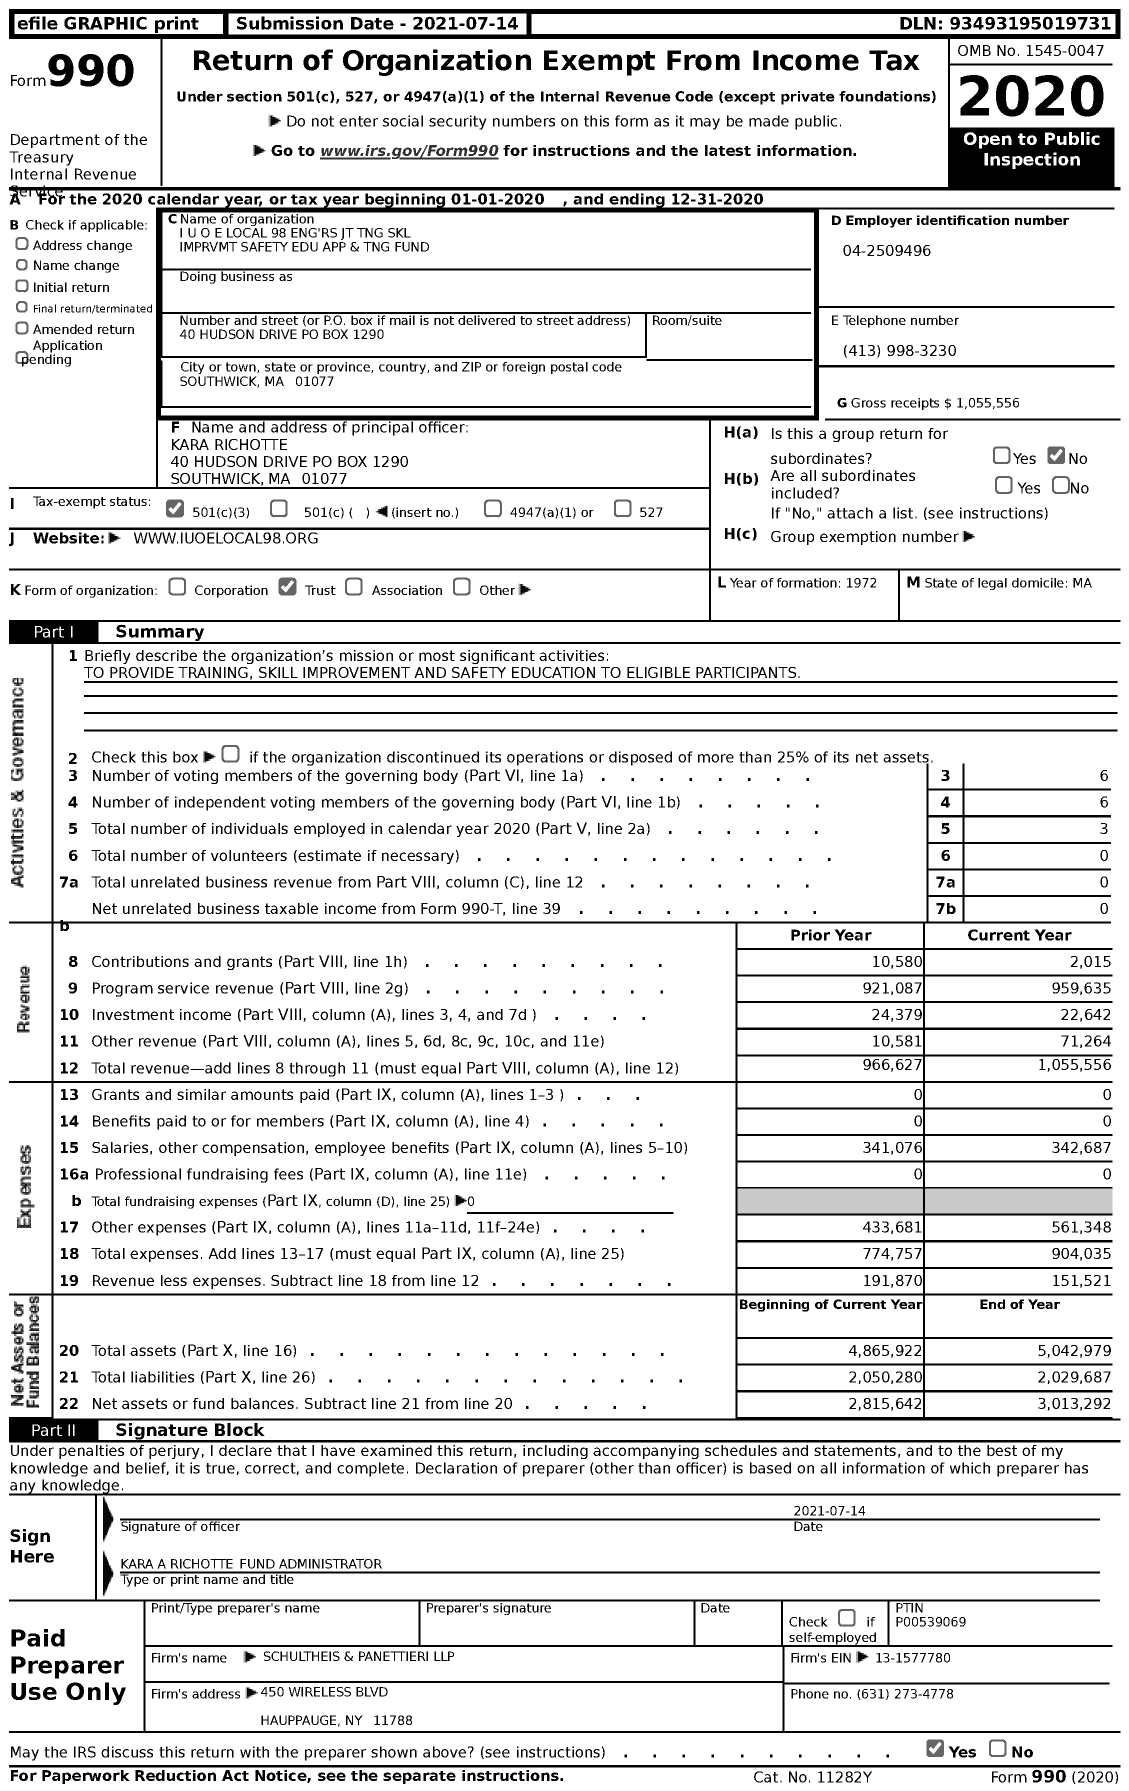 Image of first page of 2020 Form 990 for I U O E Local 98 Eng'rs JT TNG SKL Imprvmt Safety Edu App and TNG Fund